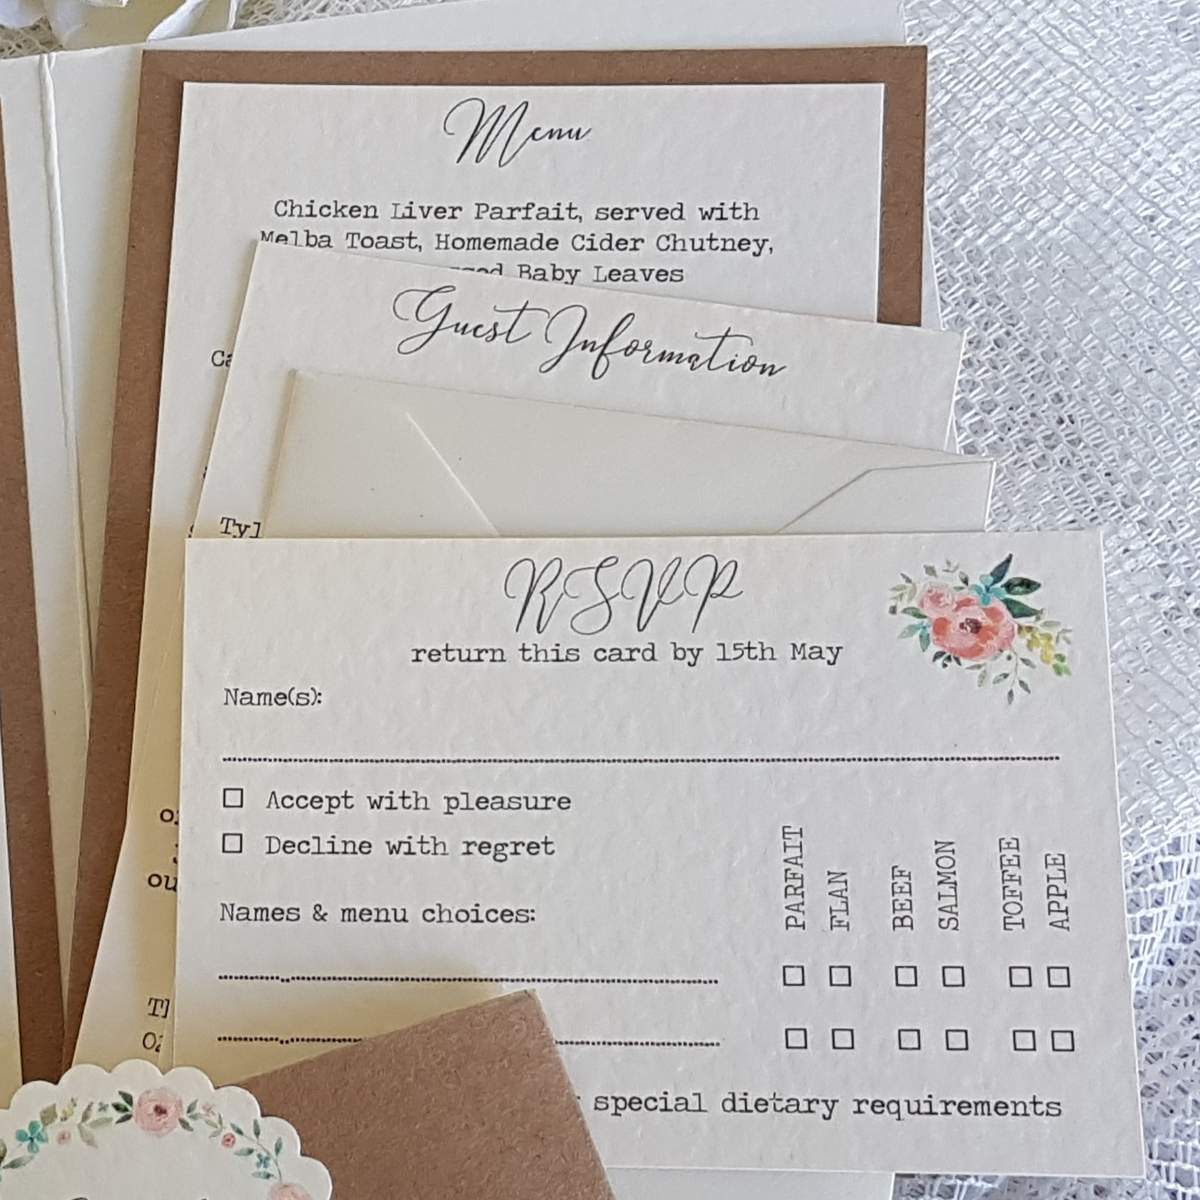 Wedding reply cards: 12 things you didn’t know about them